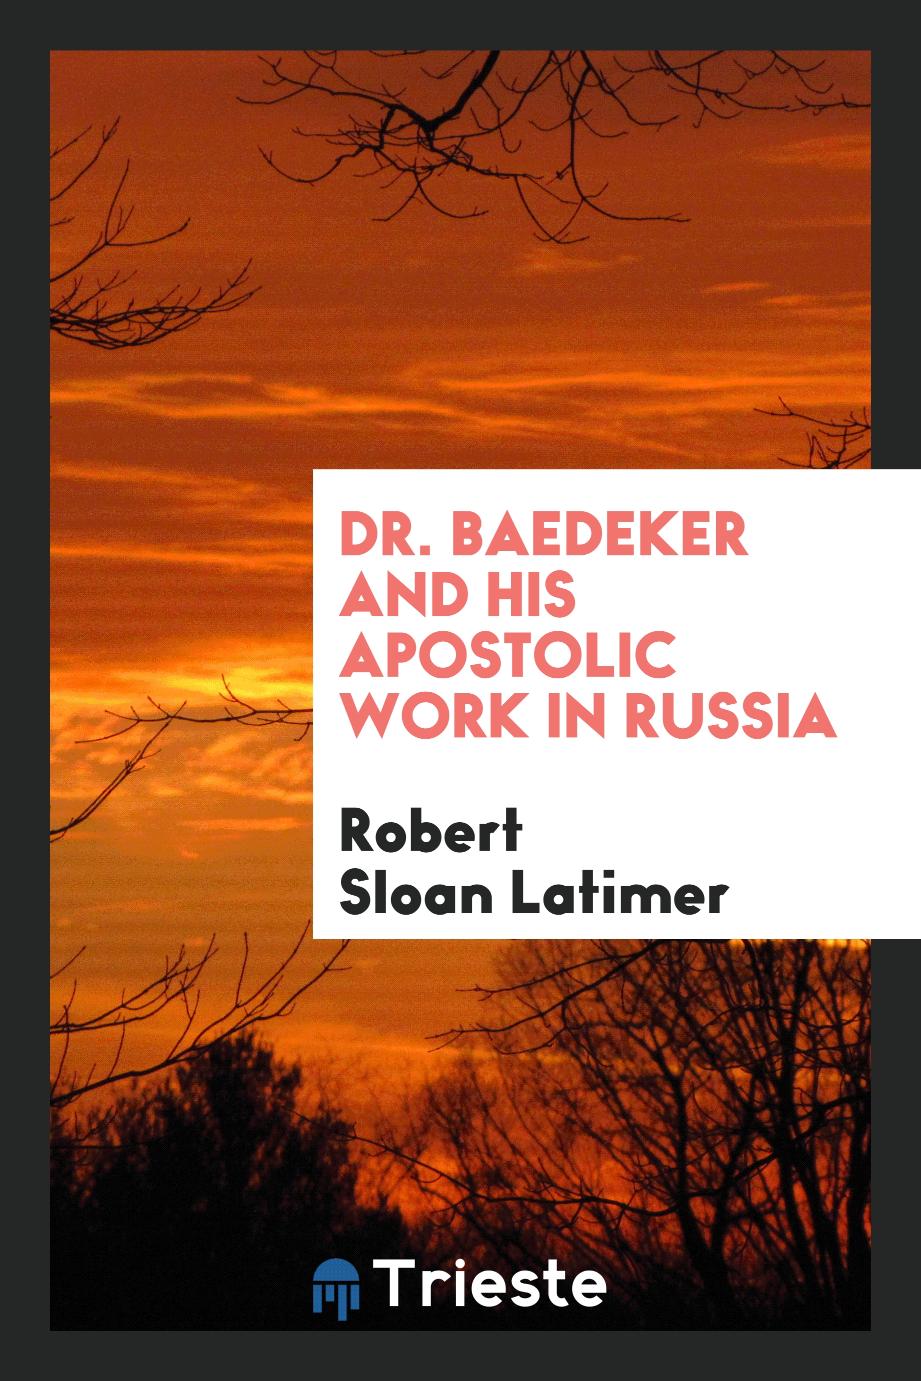 Dr. Baedeker and his apostolic work in Russia